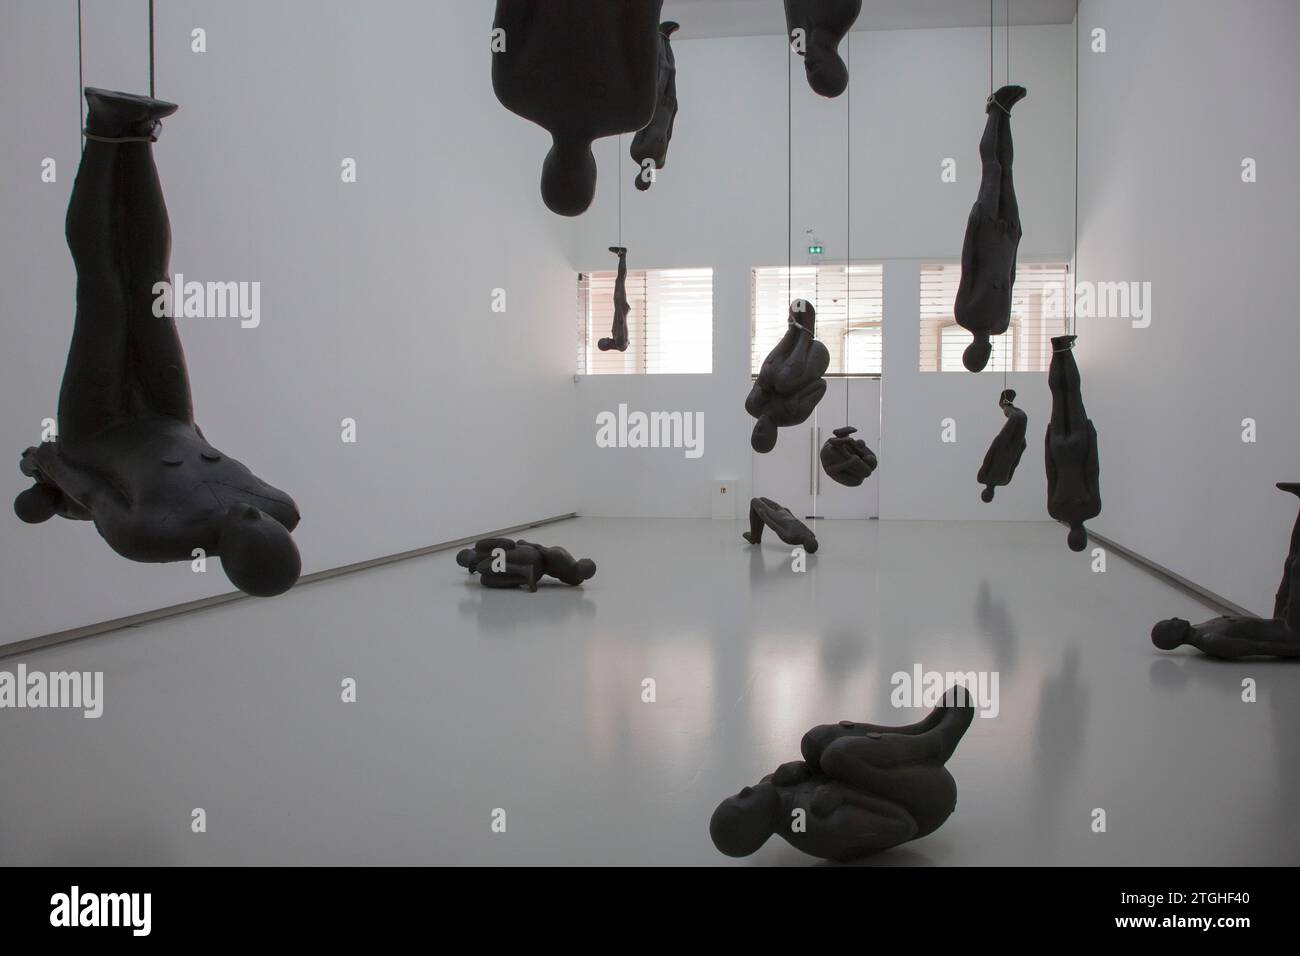 The exhibition Critical Mass by British sculptor Antony Gormley at the Musée Rodin (Rodin Museum) in Paris Stock Photo